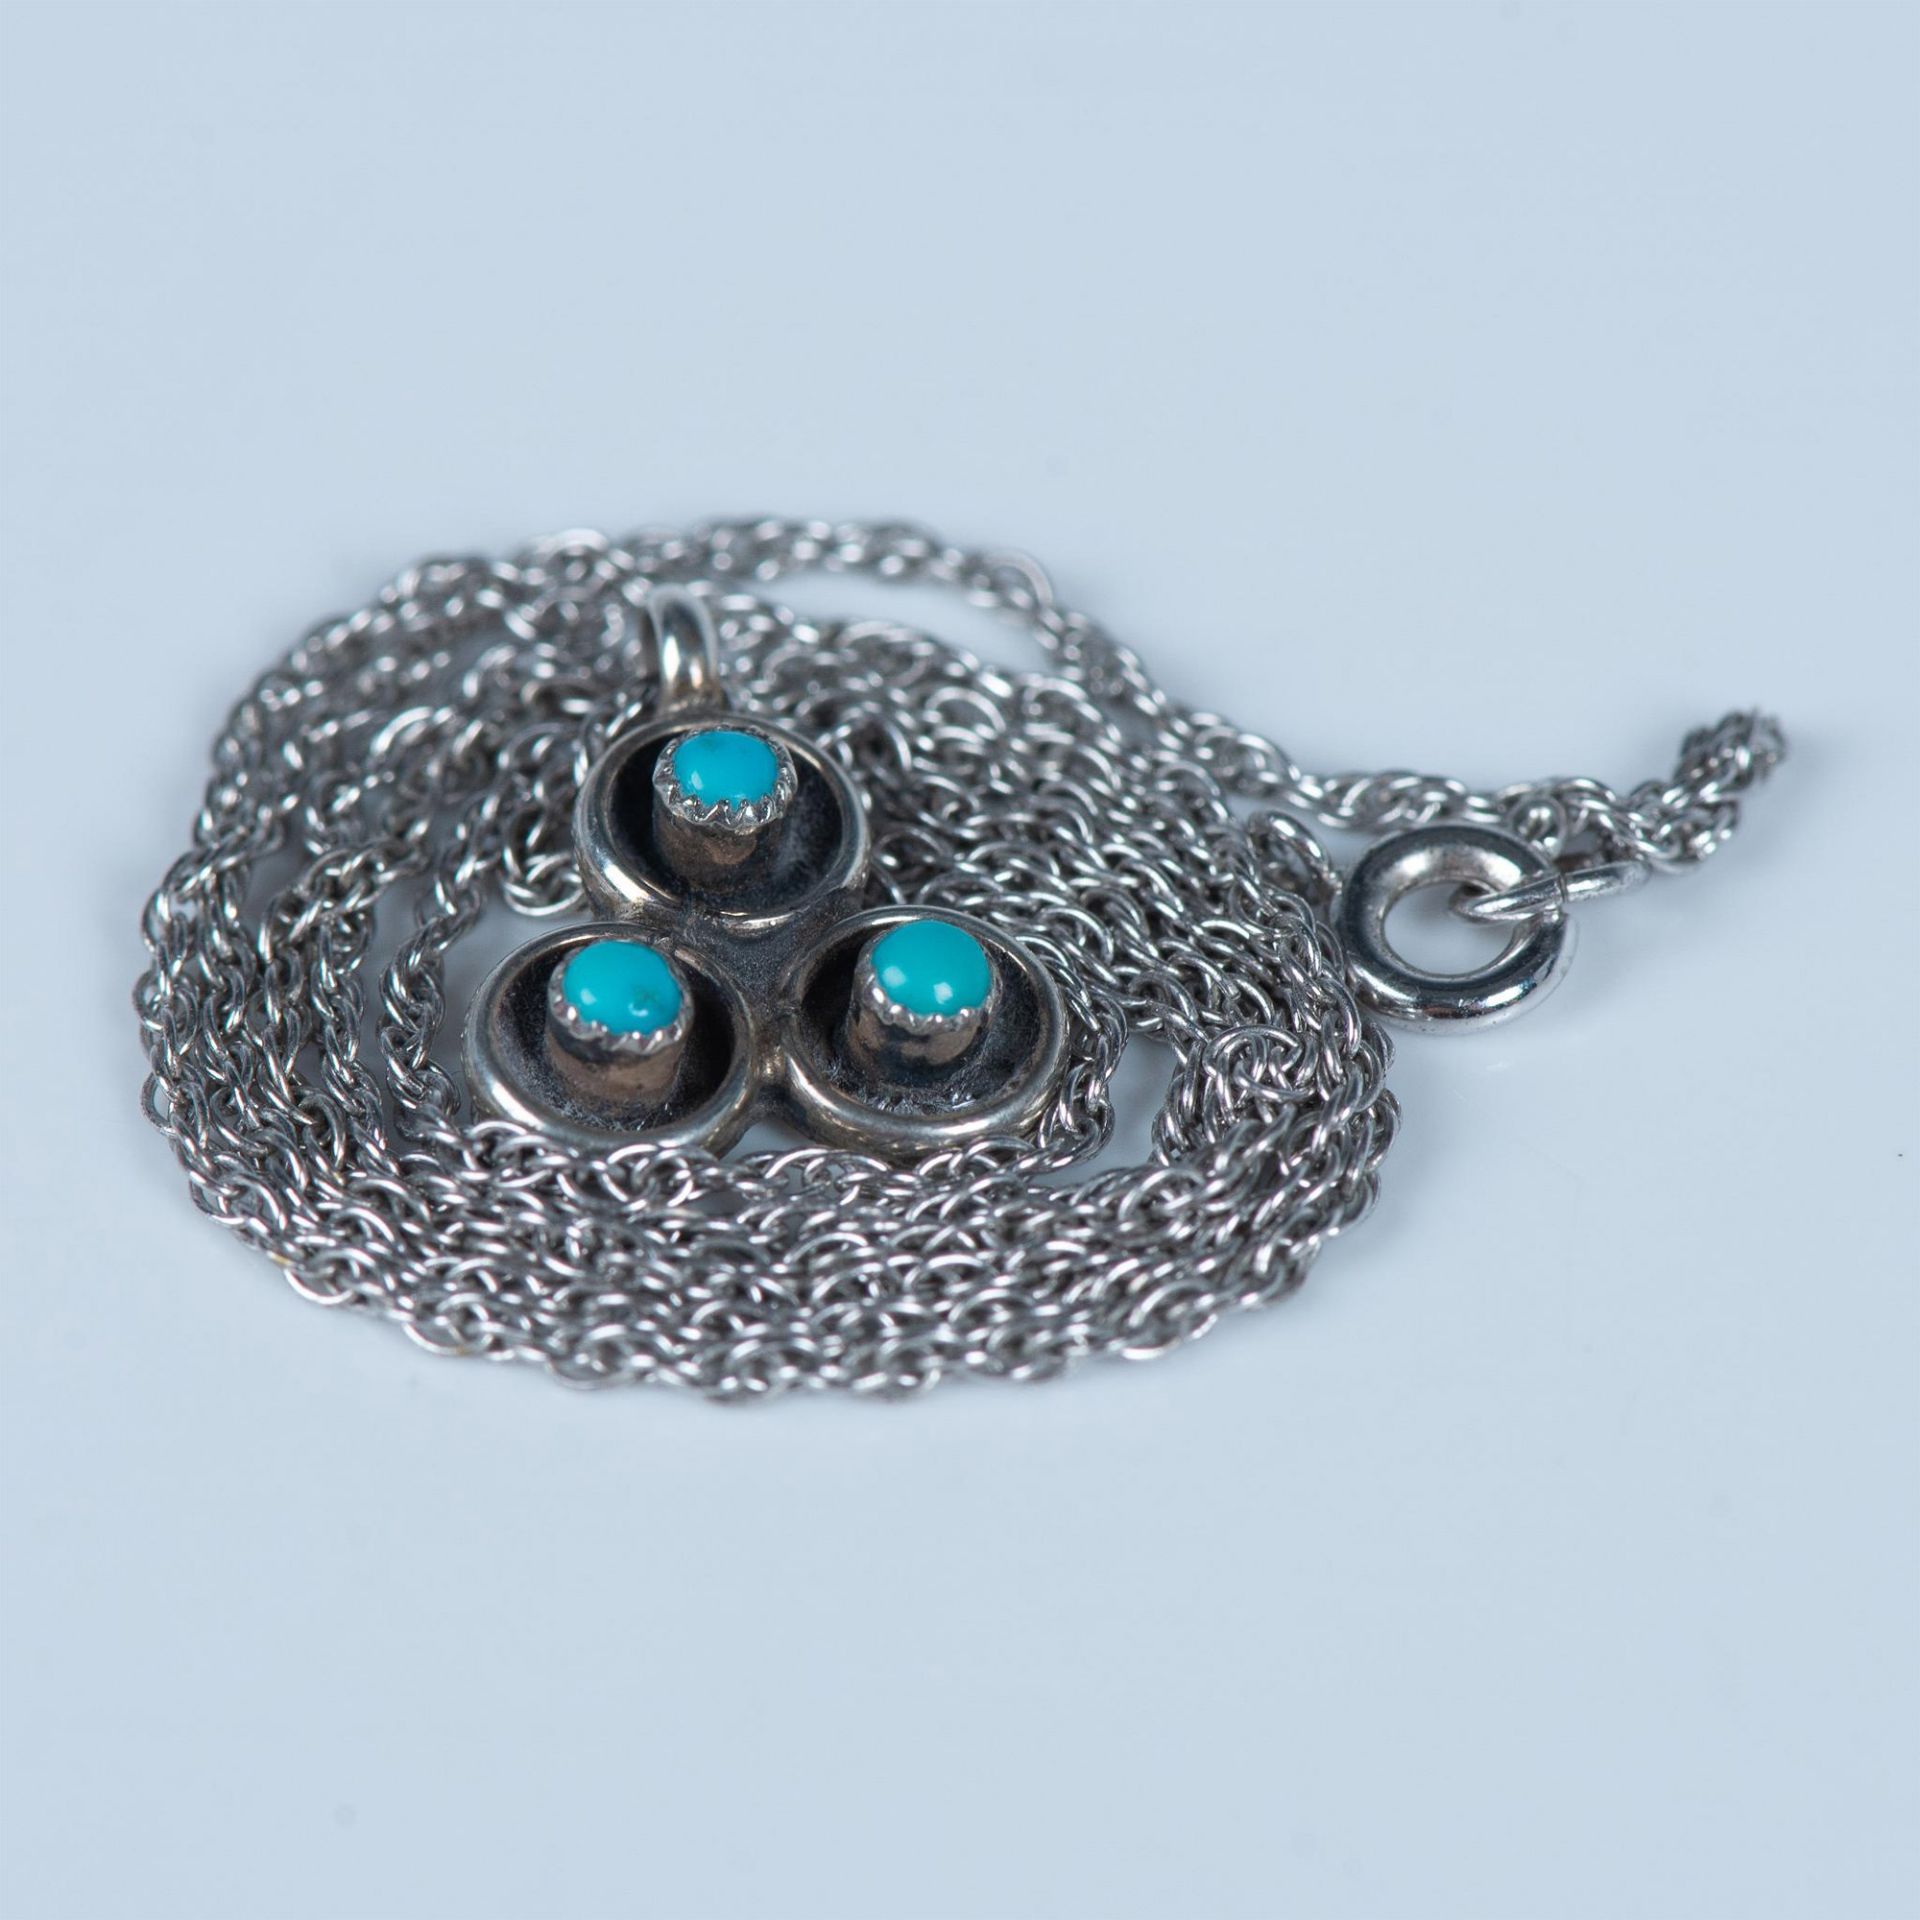 Cute Small Sterling Silver & Turquoise Necklace - Image 3 of 5